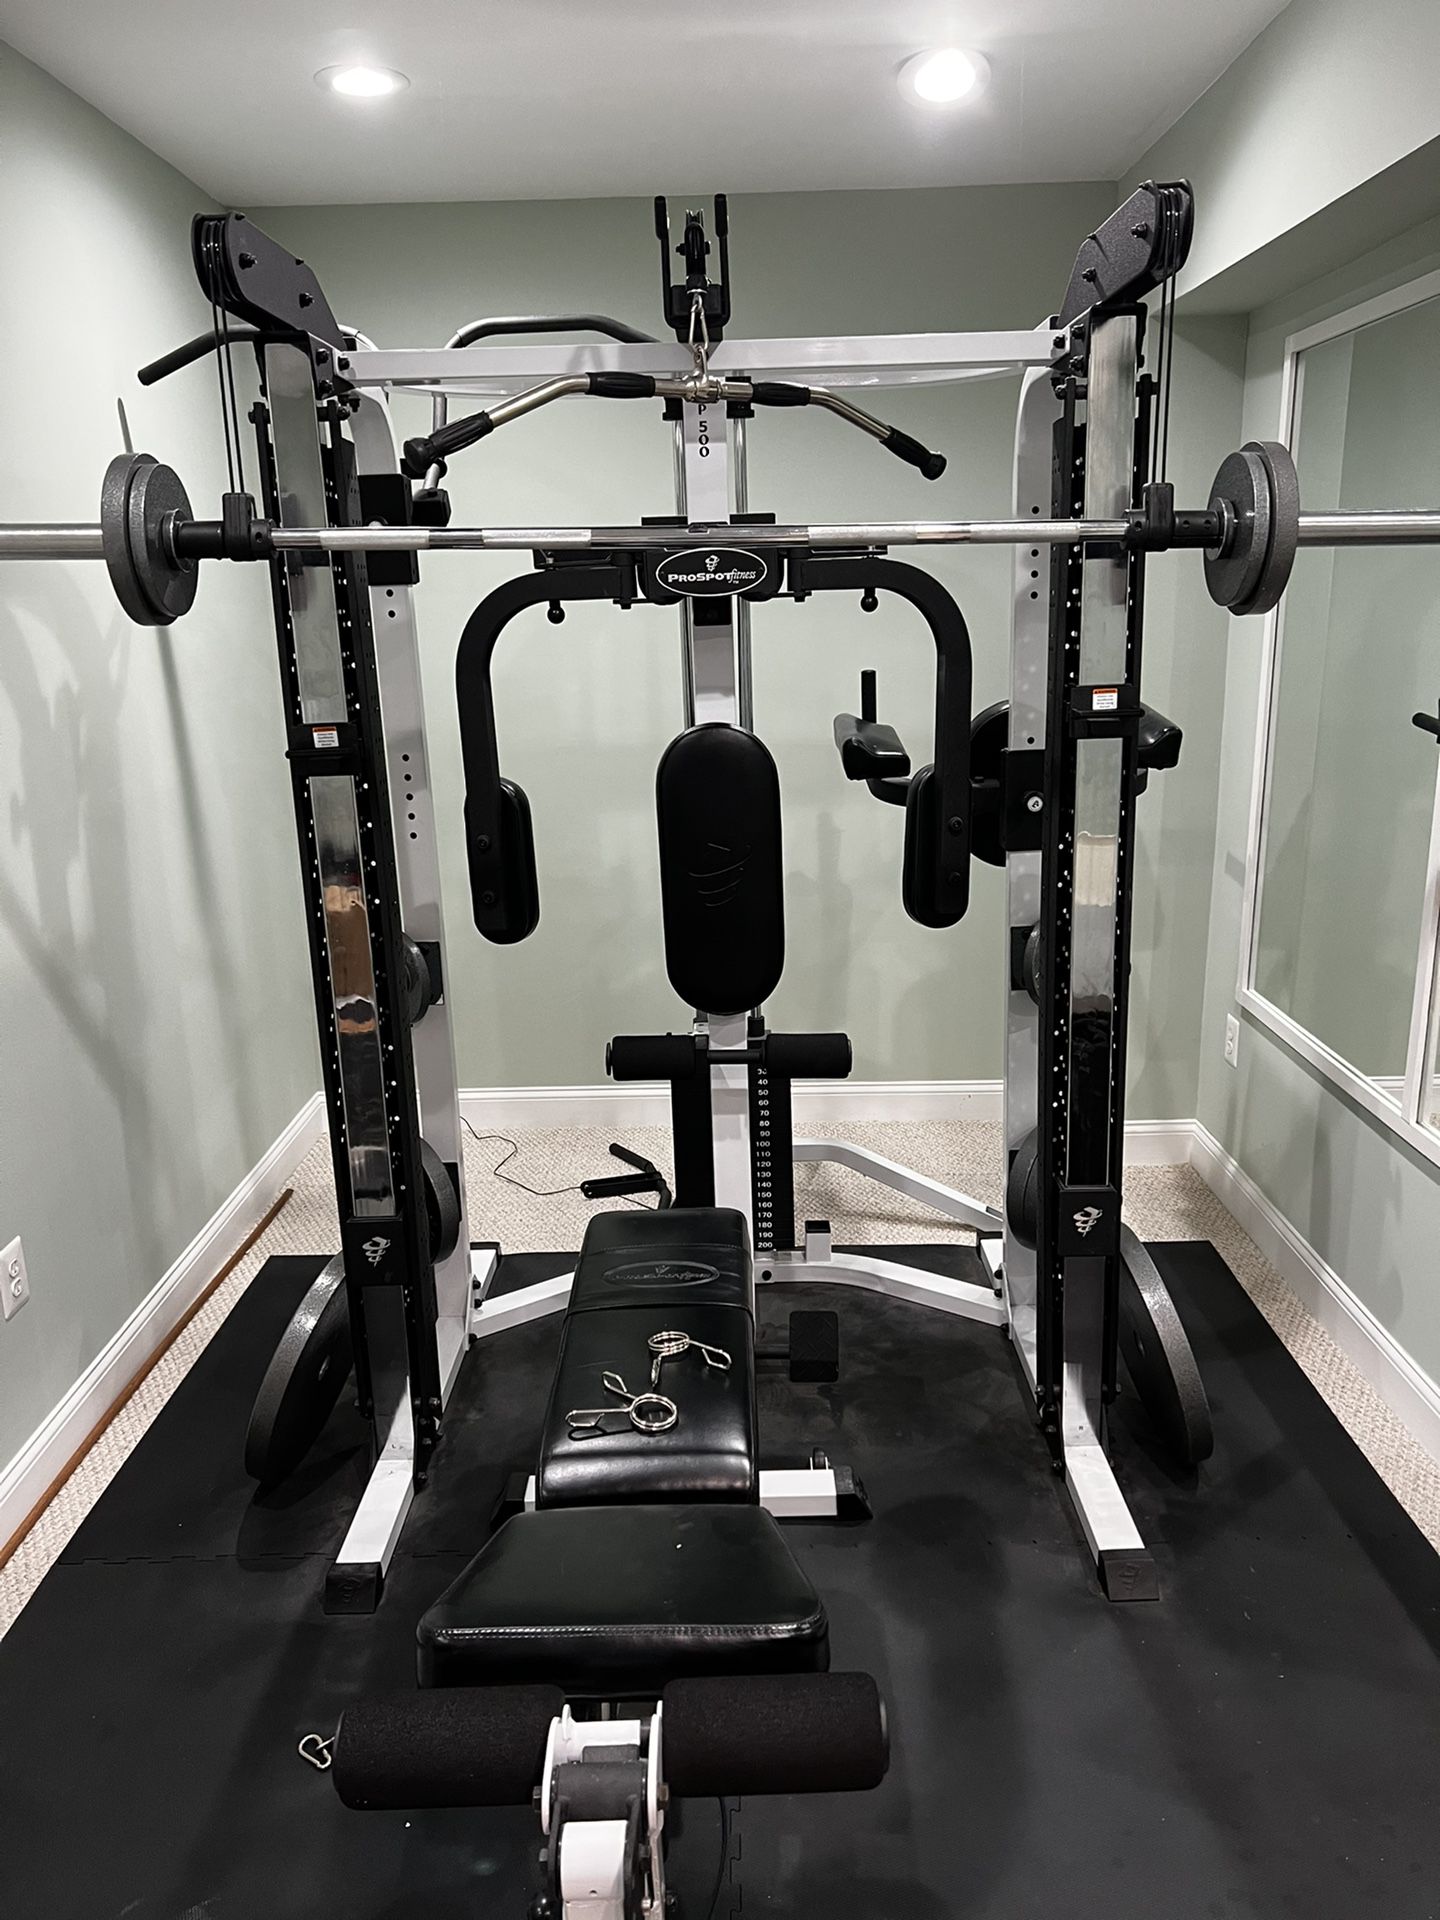 PRO SPOT FITNESS P500 HOME GYM, BENCH, AND WEIGHTS.